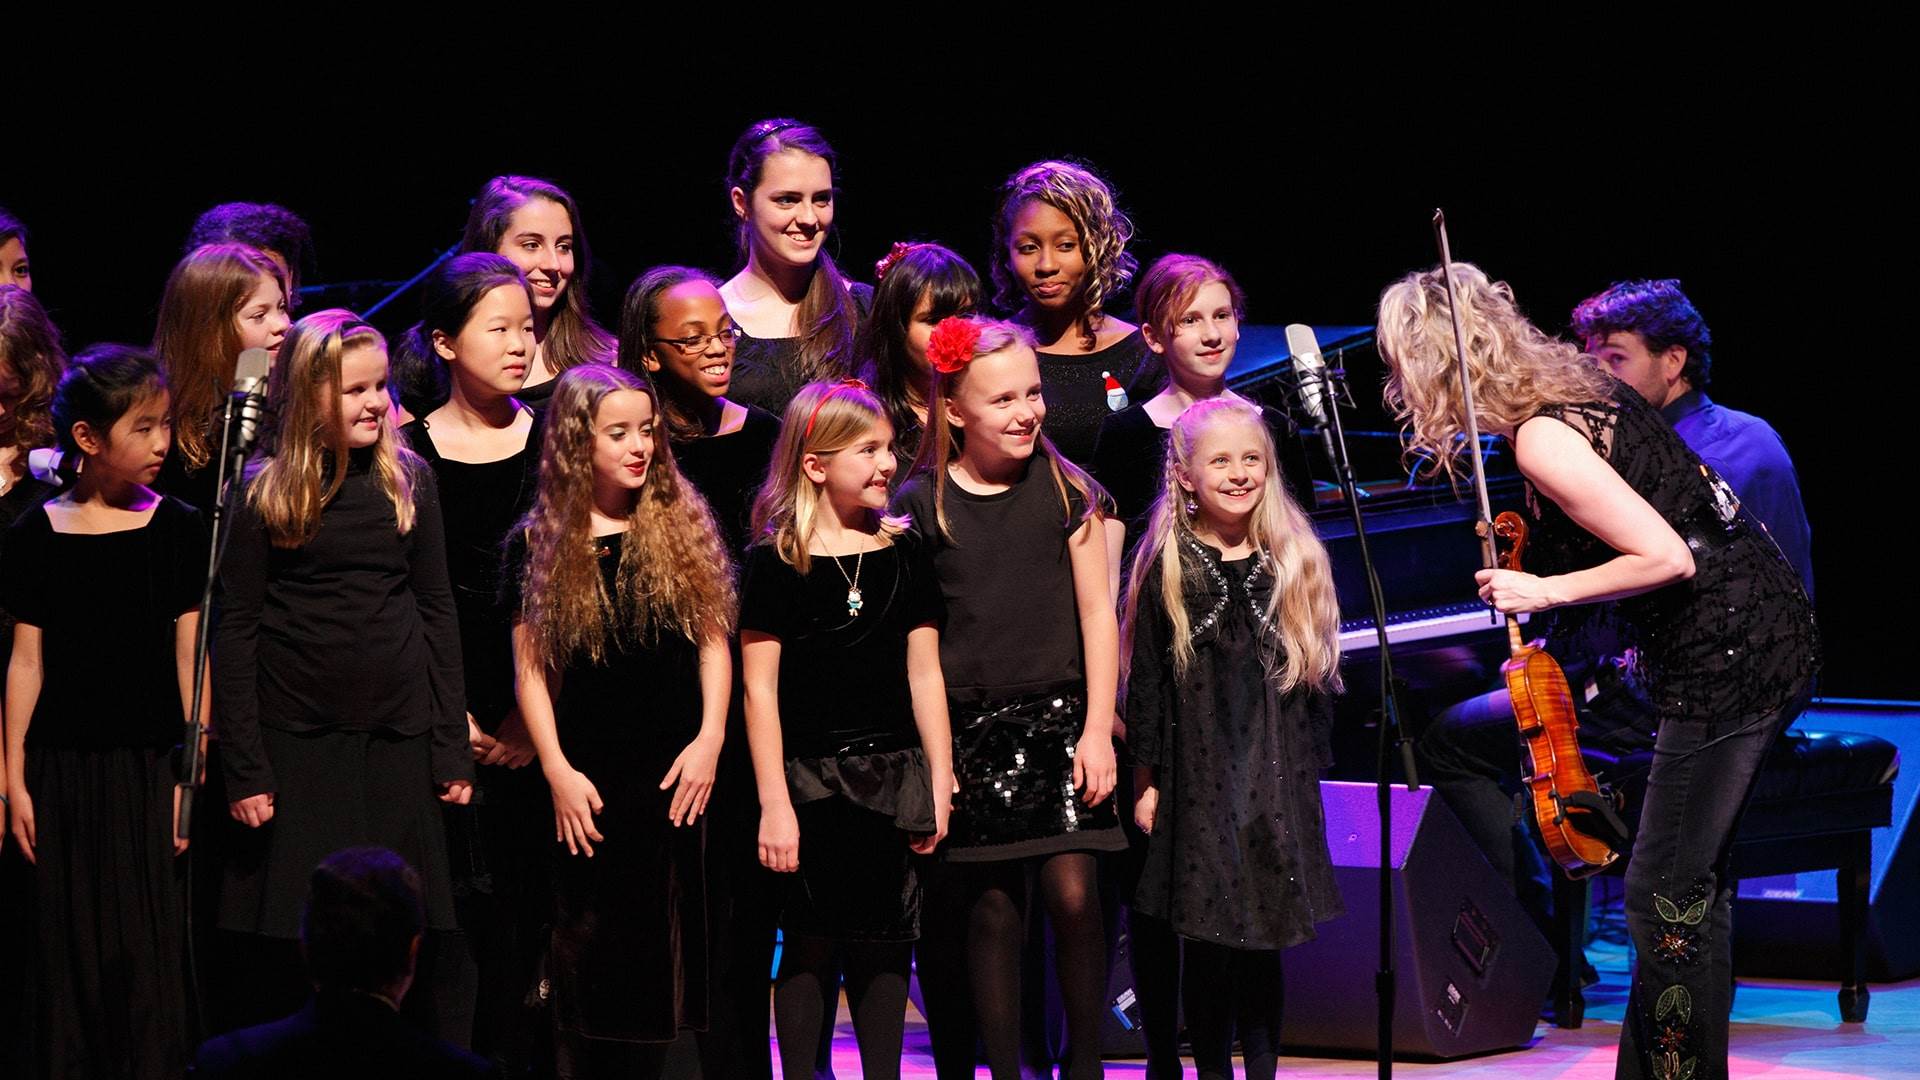 Natalie Macmaster And Members Of Strathmore Children's Chorus On Stage 1920X1080